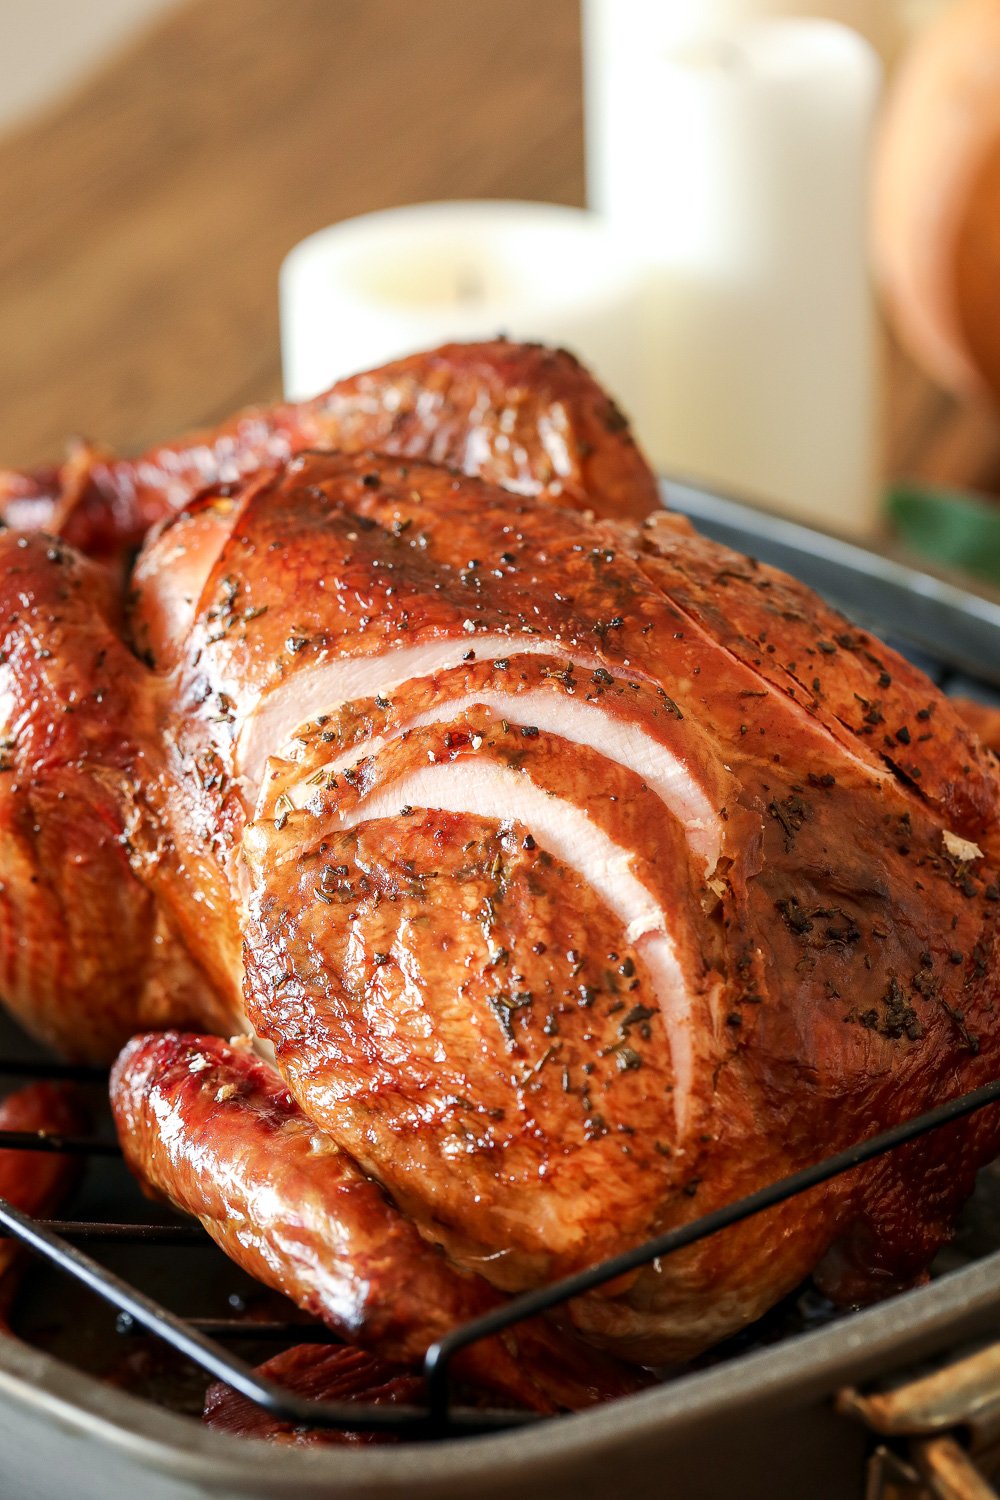 This Whole30 Smoked Turkey recipe is simple, delicious and perfect for saving oven space on thanksgiving!